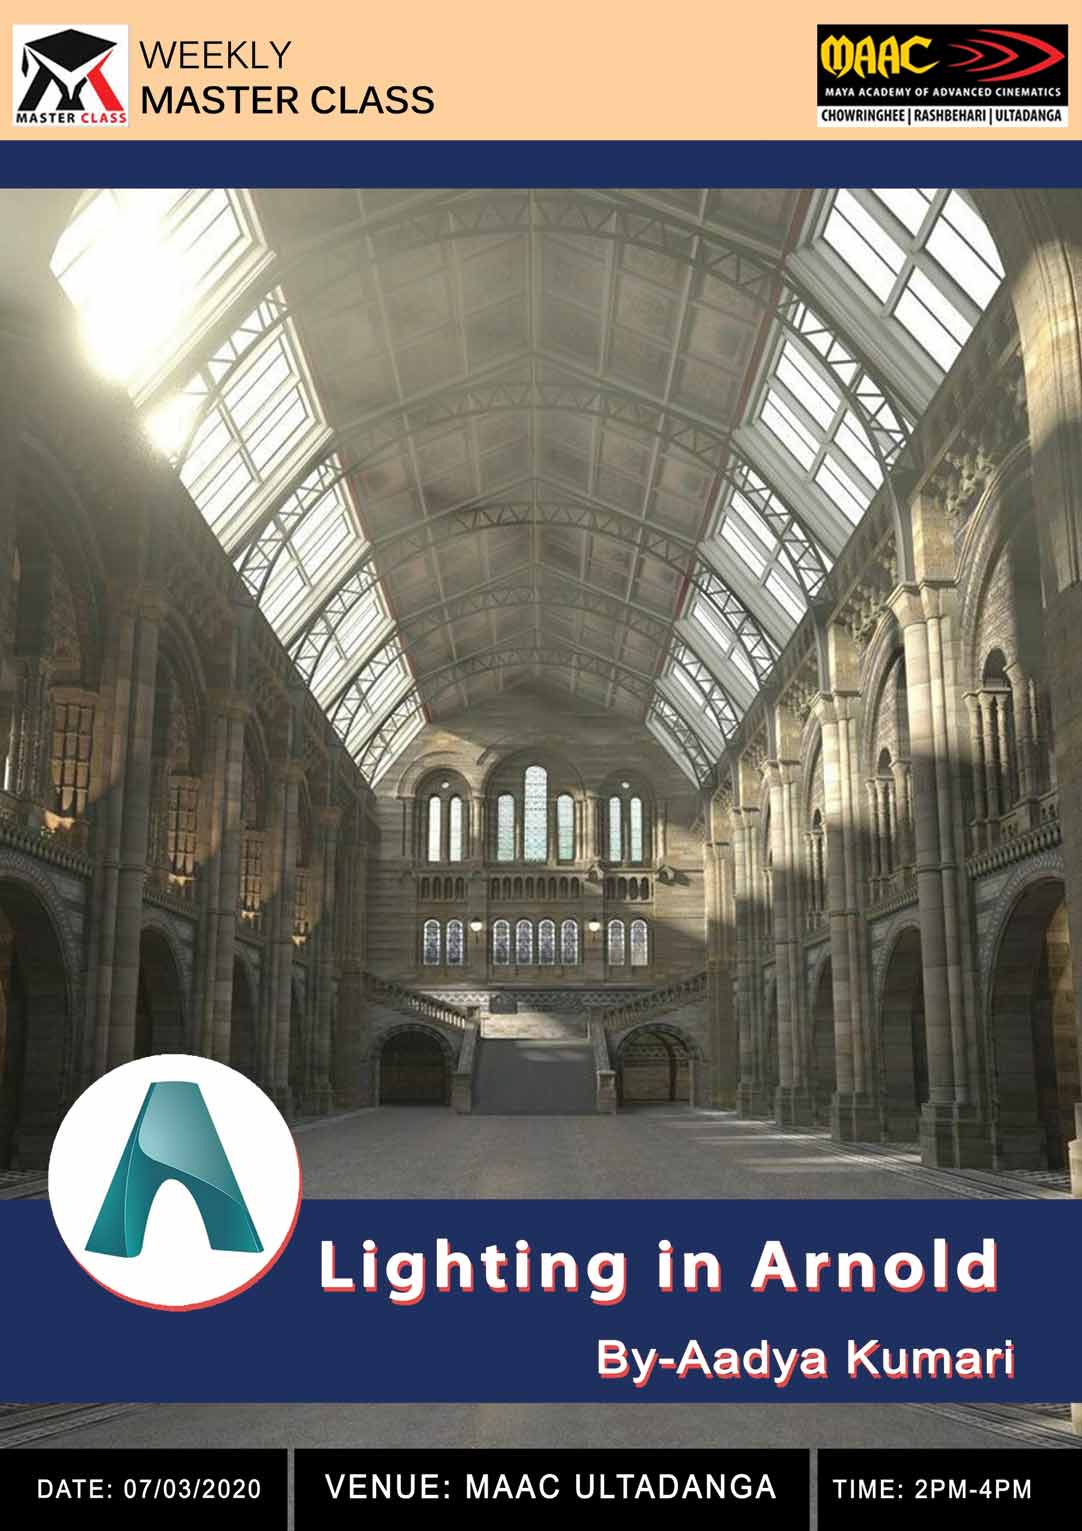 Weekly Master Class on Lighting in Arnold